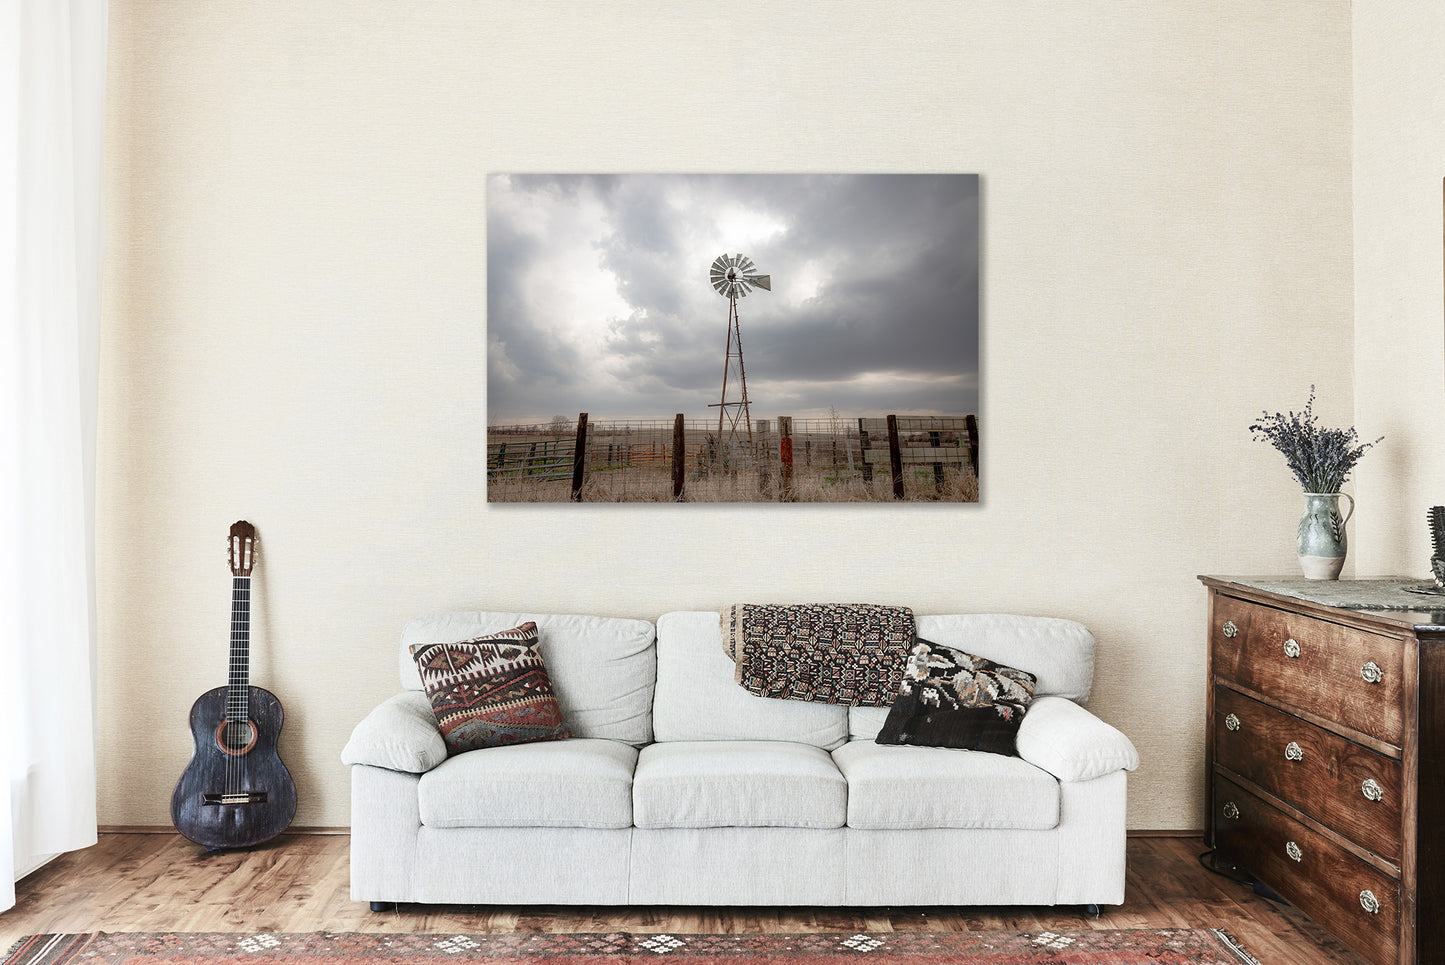 Country Canvas Wall Art - Gallery Wrap of Rustic Windmill Against Silver Sky on Farm in Iowa - Farmhouse Photography Artwork Decor